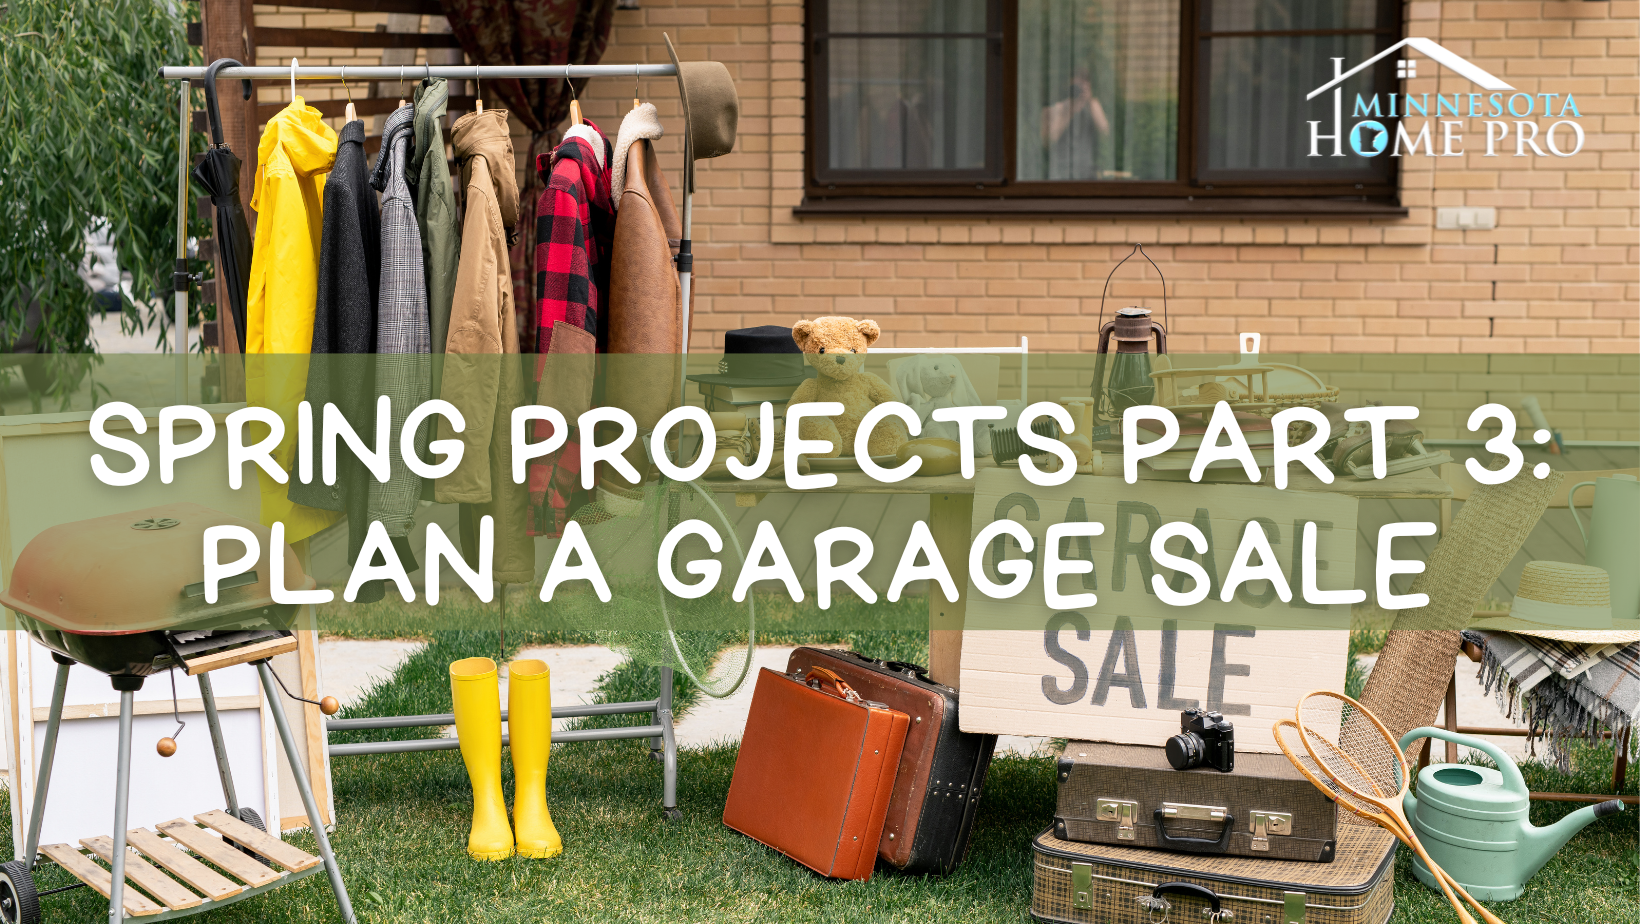 Spring Projects Part 3: Plan a Garage Sale